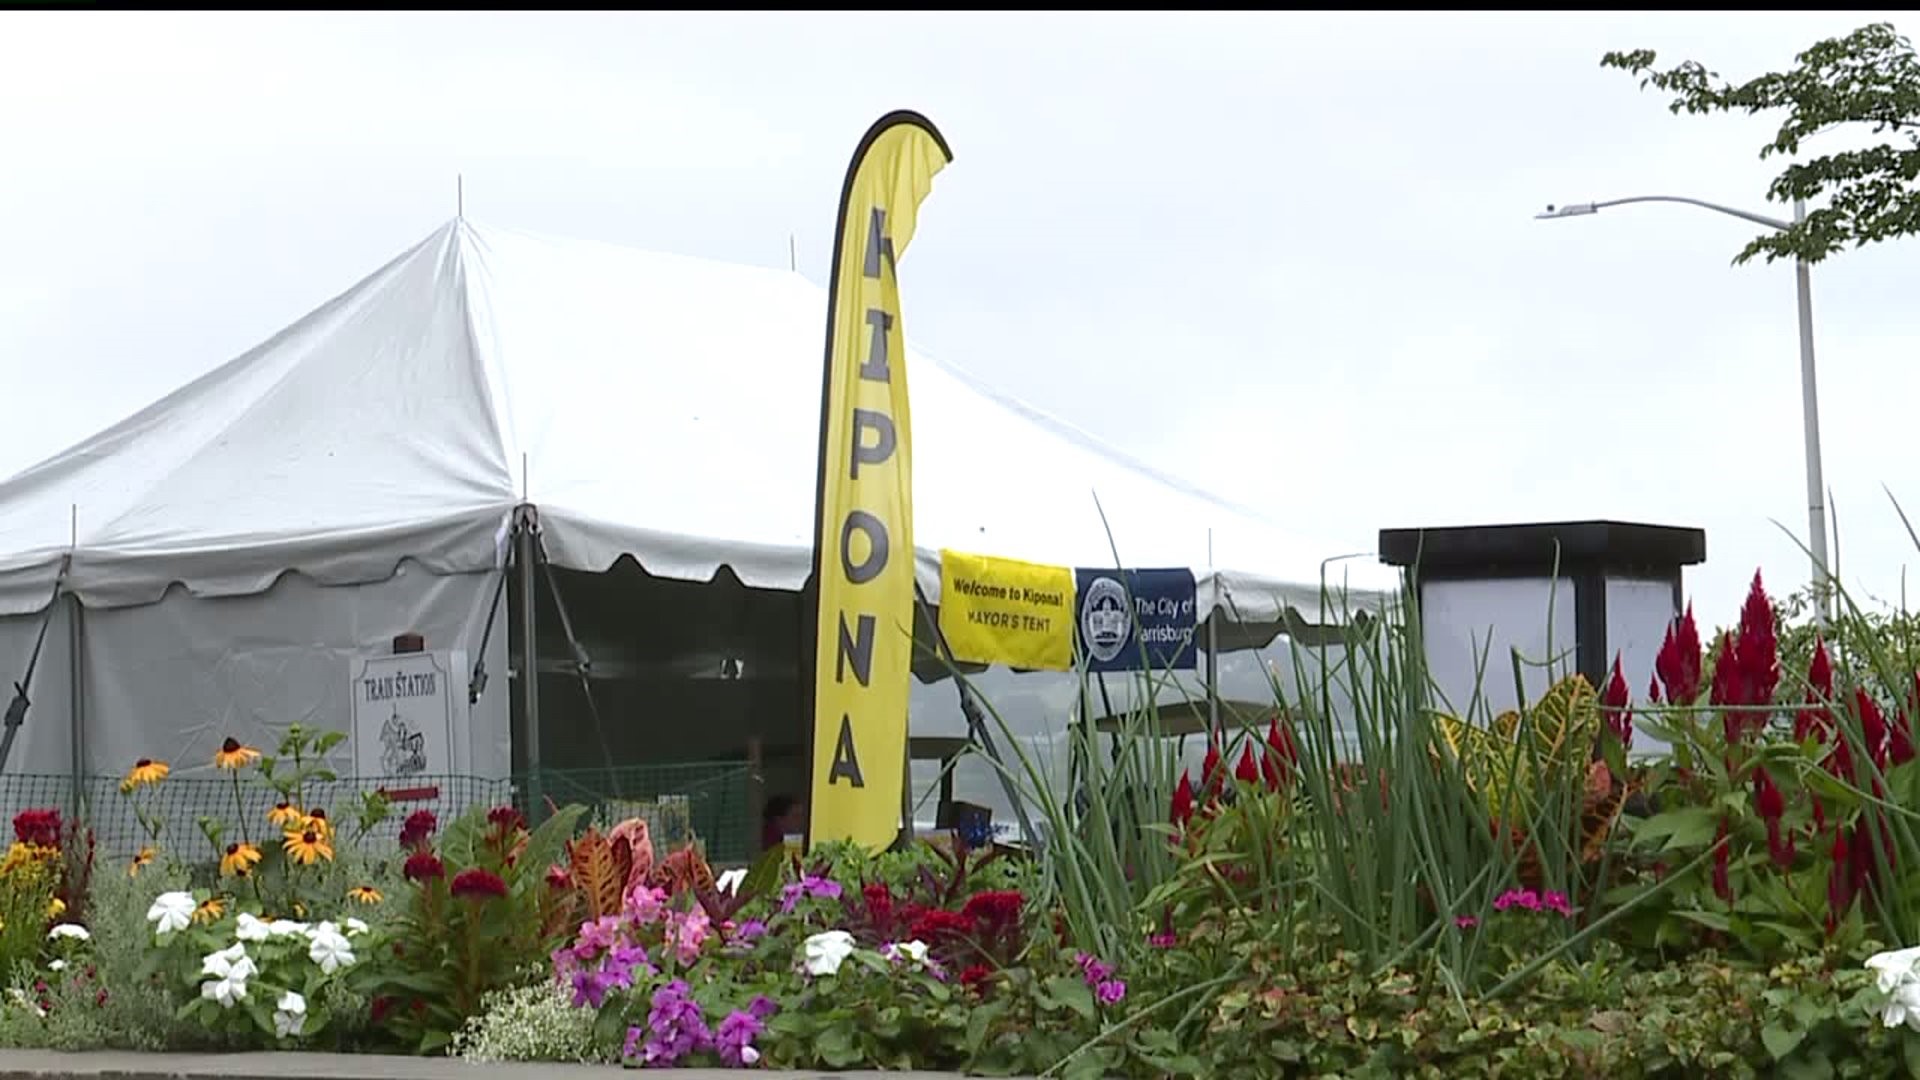 Dreary start to Kipona Festival, but it has much to offer all weekend